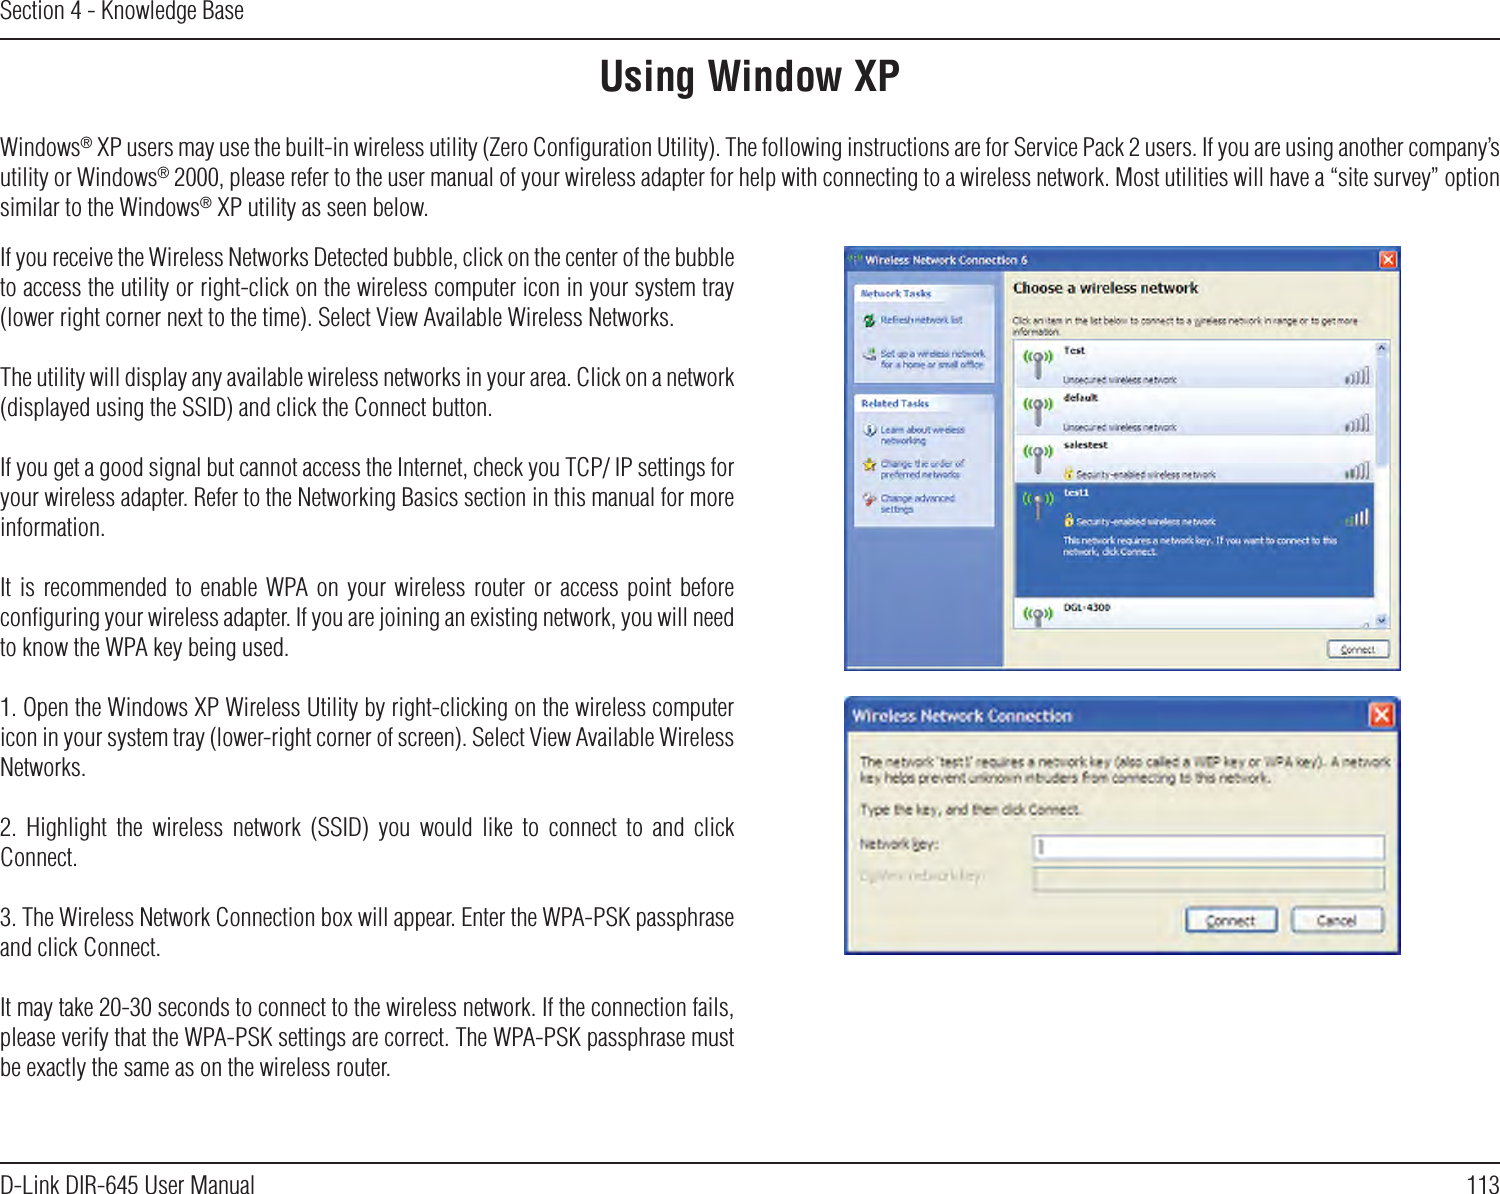 113D-Link DIR-645 User ManualSection 4 - Knowledge BaseUsing Window XPWindows® XP users may use the built-in wireless utility (Zero Conﬁguration Utility). The following instructions are for Service Pack 2 users. If you are using another company’s utility or Windows® 2000, please refer to the user manual of your wireless adapter for help with connecting to a wireless network. Most utilities will have a “site survey” option similar to the Windows® XP utility as seen below.If you receive the Wireless Networks Detected bubble, click on the center of the bubble to access the utility or right-click on the wireless computer icon in your system tray (lower right corner next to the time). Select View Available Wireless Networks.The utility will display any available wireless networks in your area. Click on a network (displayed using the SSID) and click the Connect button.If you get a good signal but cannot access the Internet, check you TCP/ IP settings for your wireless adapter. Refer to the Networking Basics section in this manual for more information.It is recommended  to  enable  WPA on  your  wireless  router  or  access  point  before conﬁguring your wireless adapter. If you are joining an existing network, you will need to know the WPA key being used.1. Open the Windows XP Wireless Utility by right-clicking on the wireless computer icon in your system tray (lower-right corner of screen). Select View Available Wireless Networks.2.  Highlight  the  wireless  network  (SSID)  you  would  like  to  connect  to  and  click Connect.3. The Wireless Network Connection box will appear. Enter the WPA-PSK passphrase and click Connect.It may take 20-30 seconds to connect to the wireless network. If the connection fails, please verify that the WPA-PSK settings are correct. The WPA-PSK passphrase must be exactly the same as on the wireless router.